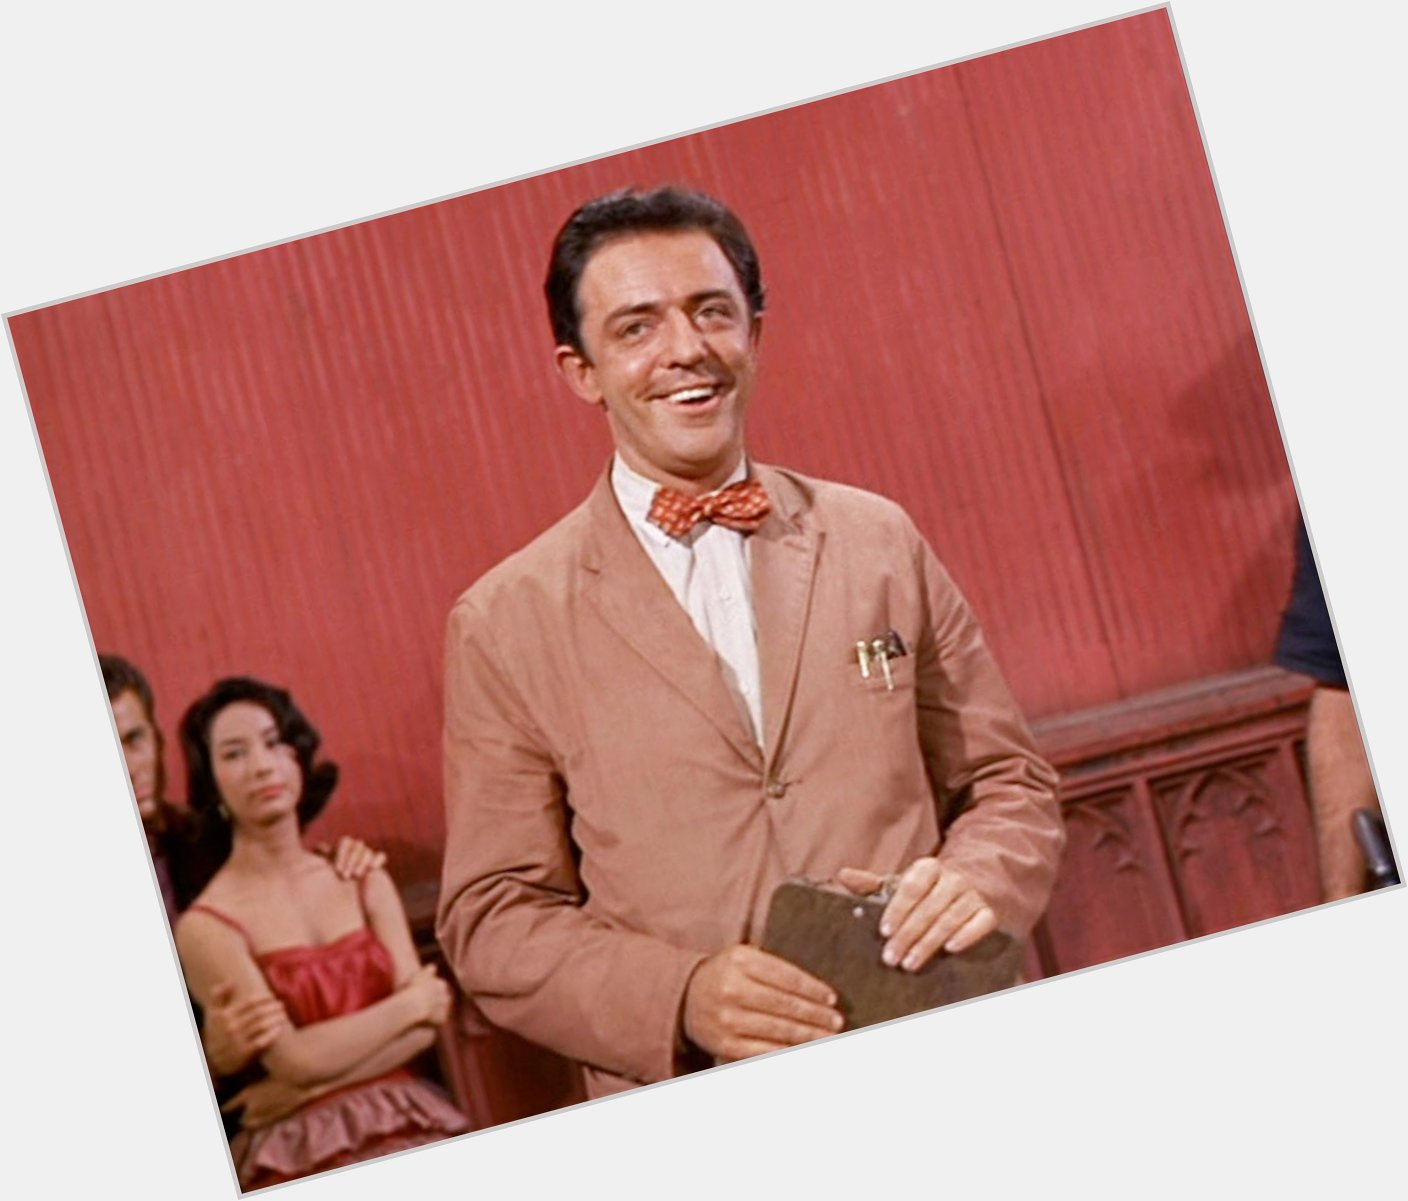 Happy Birthday to John Astin, here in WEST SIDE STORY! 